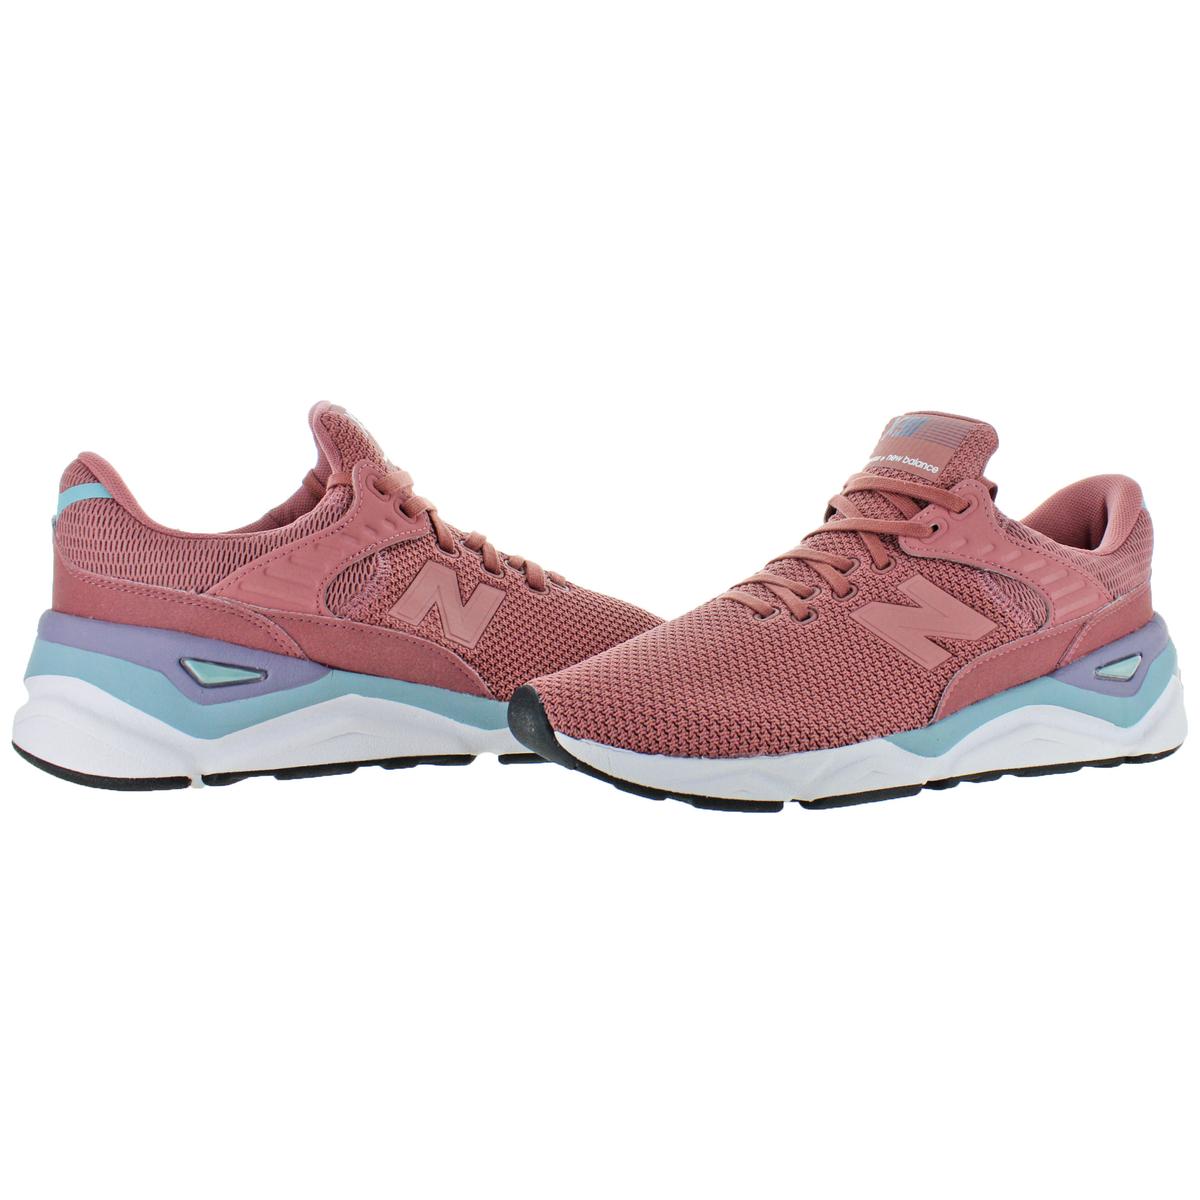 New Balance Womens X-90 Pink Athletic Shoes Sneakers 8 Medium (B,M ...